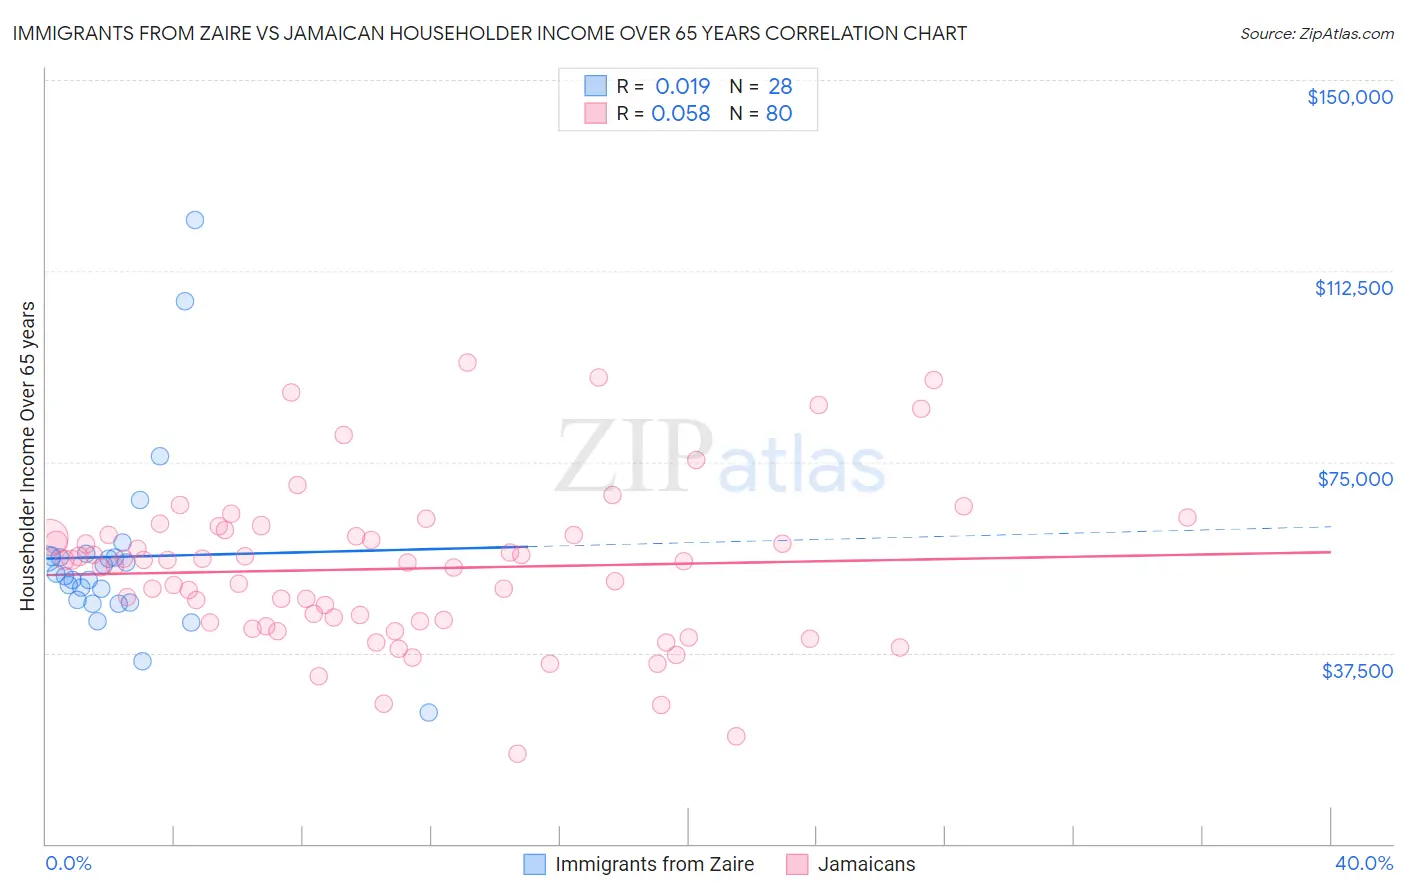 Immigrants from Zaire vs Jamaican Householder Income Over 65 years